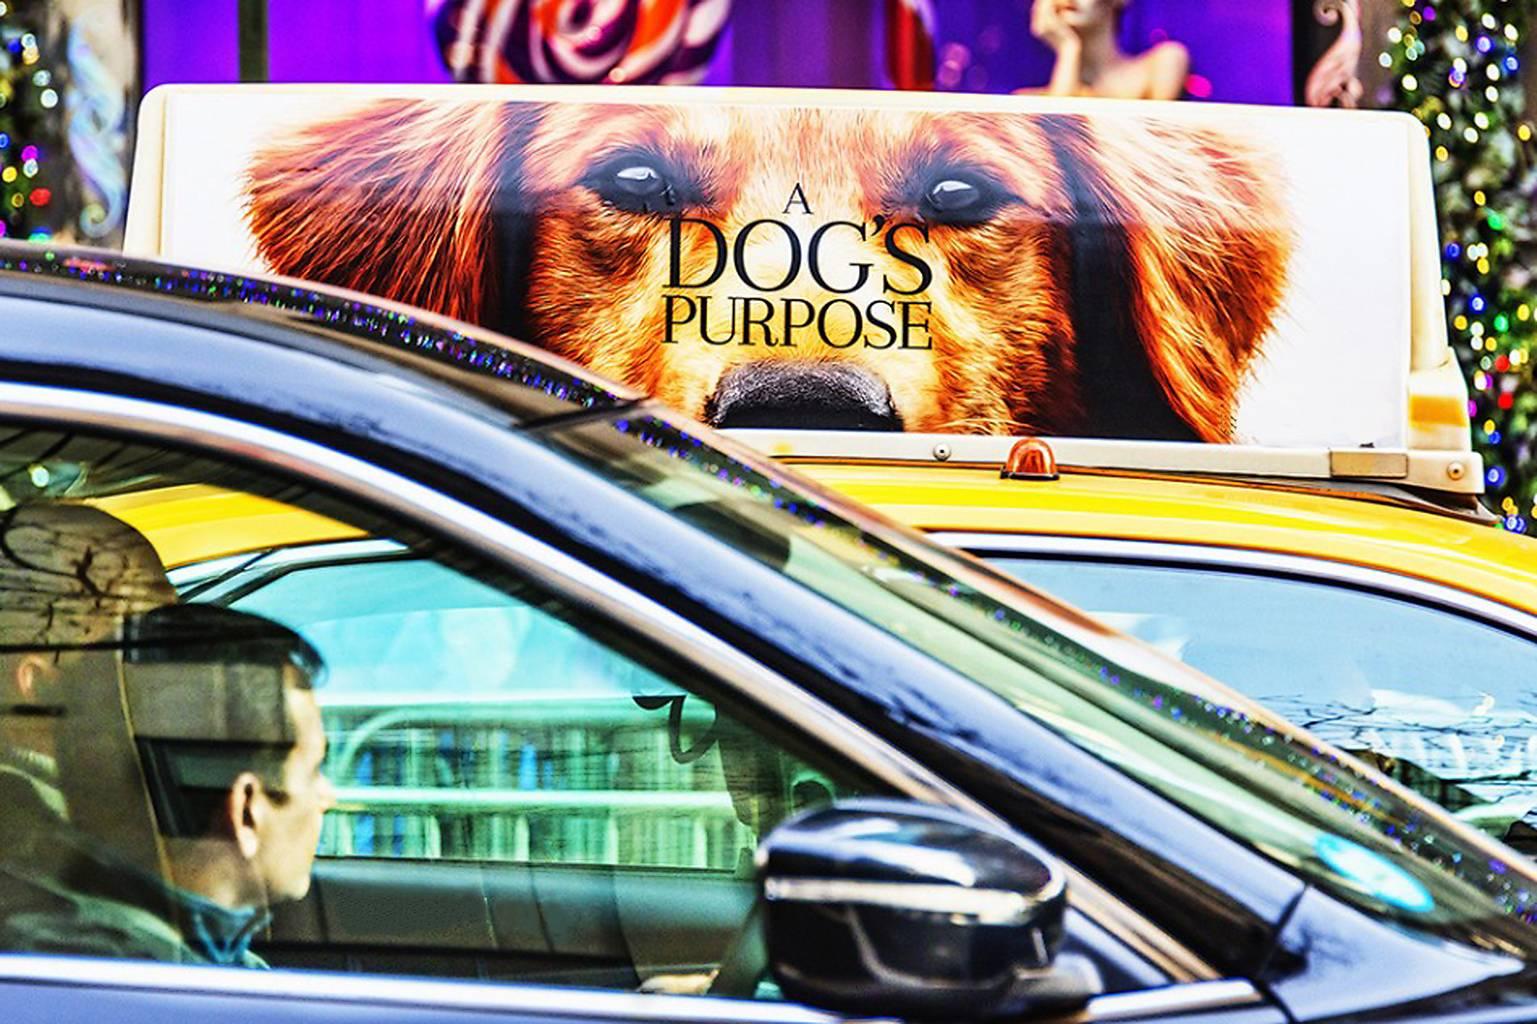 Mitchell Funk Abstract Photograph - Dog and Taxi, Street Photography